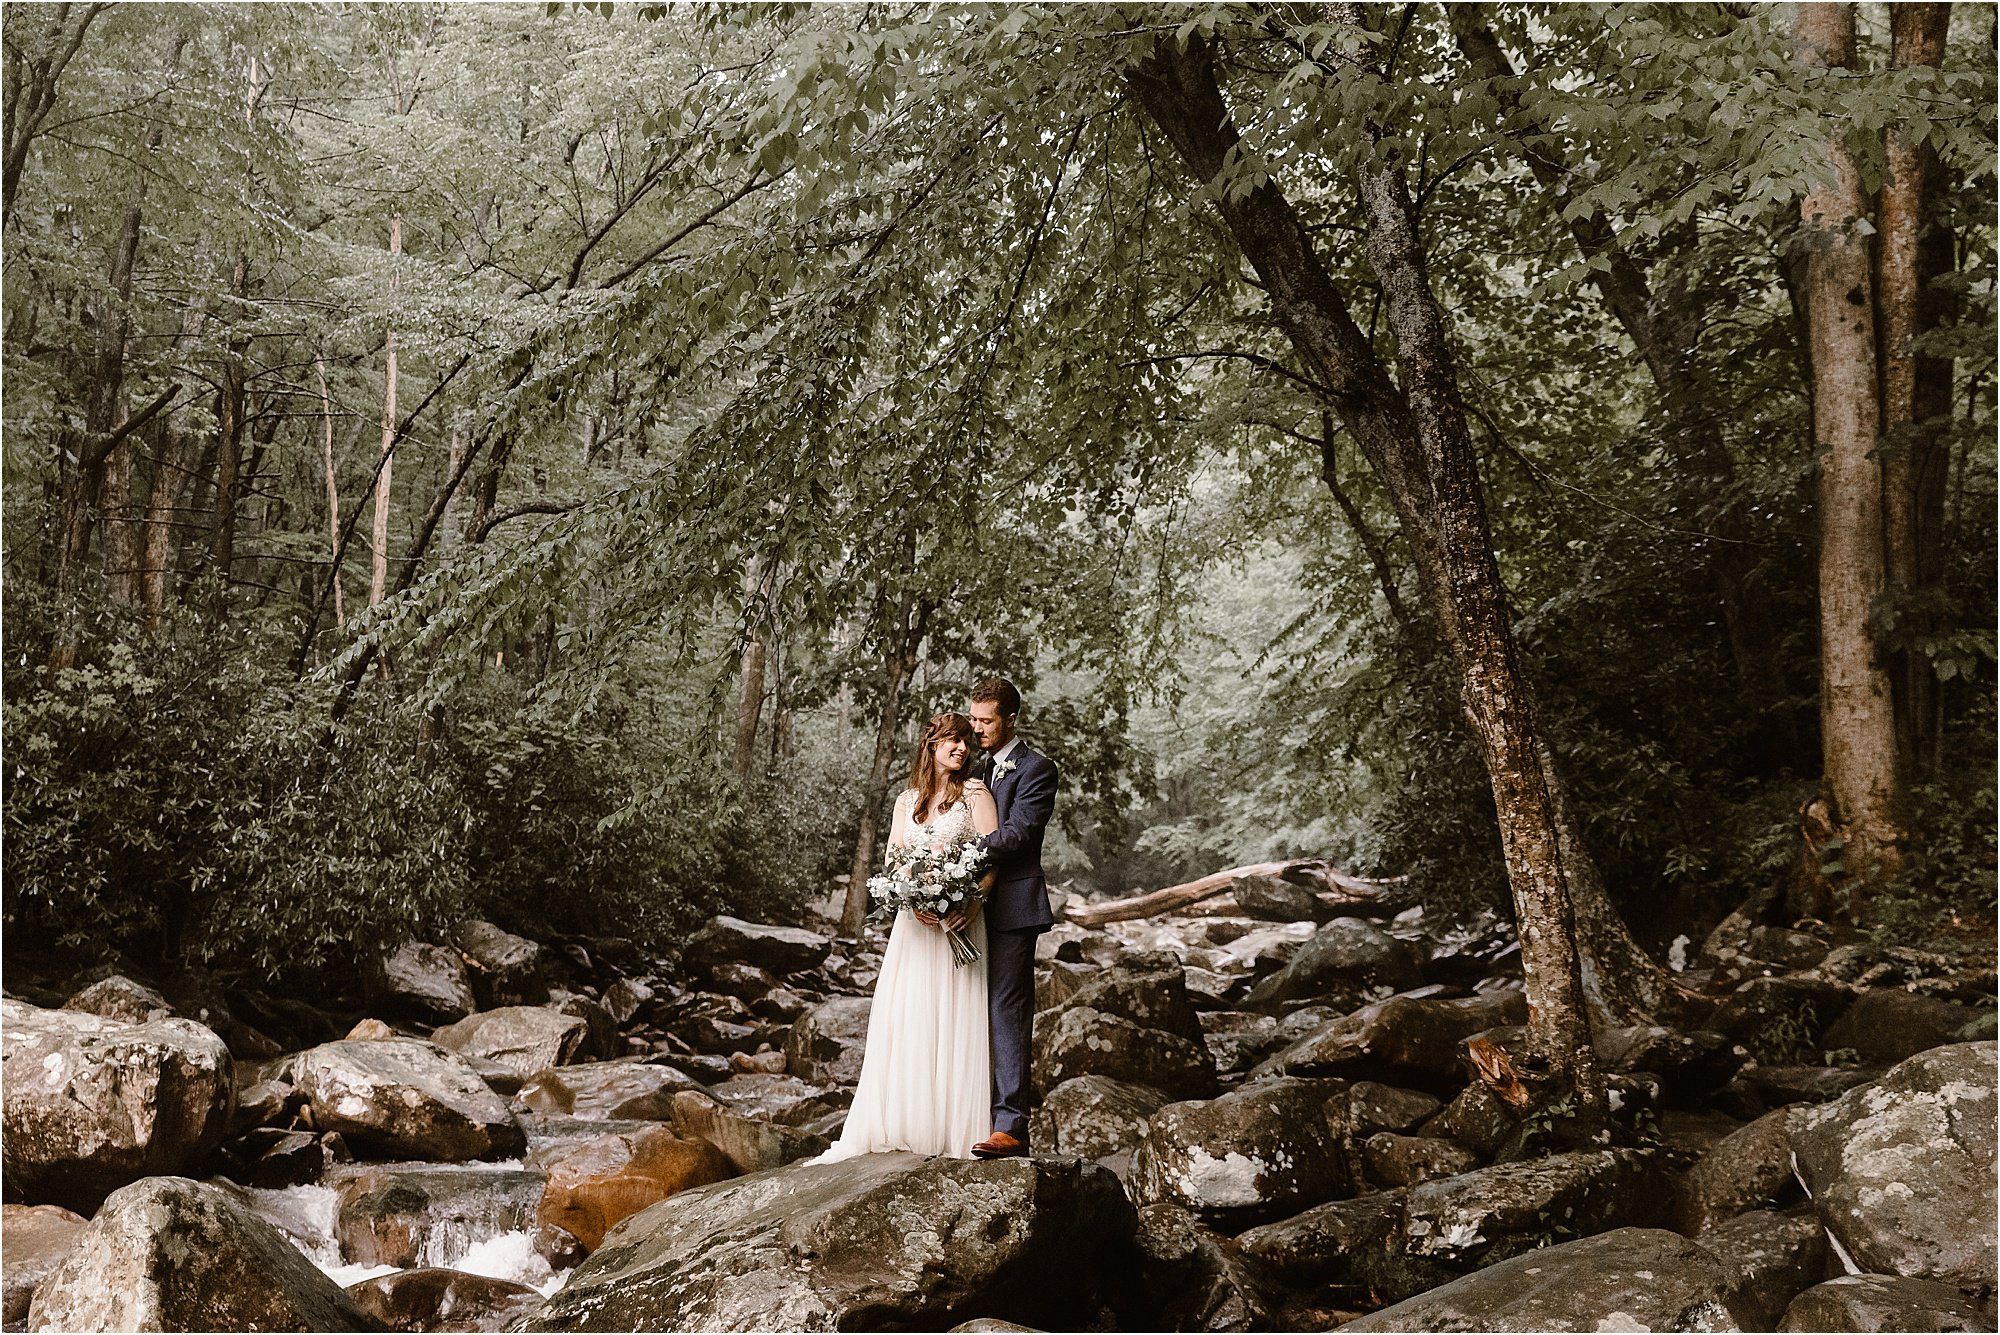 Bride and groom kiss while on the rocks of river